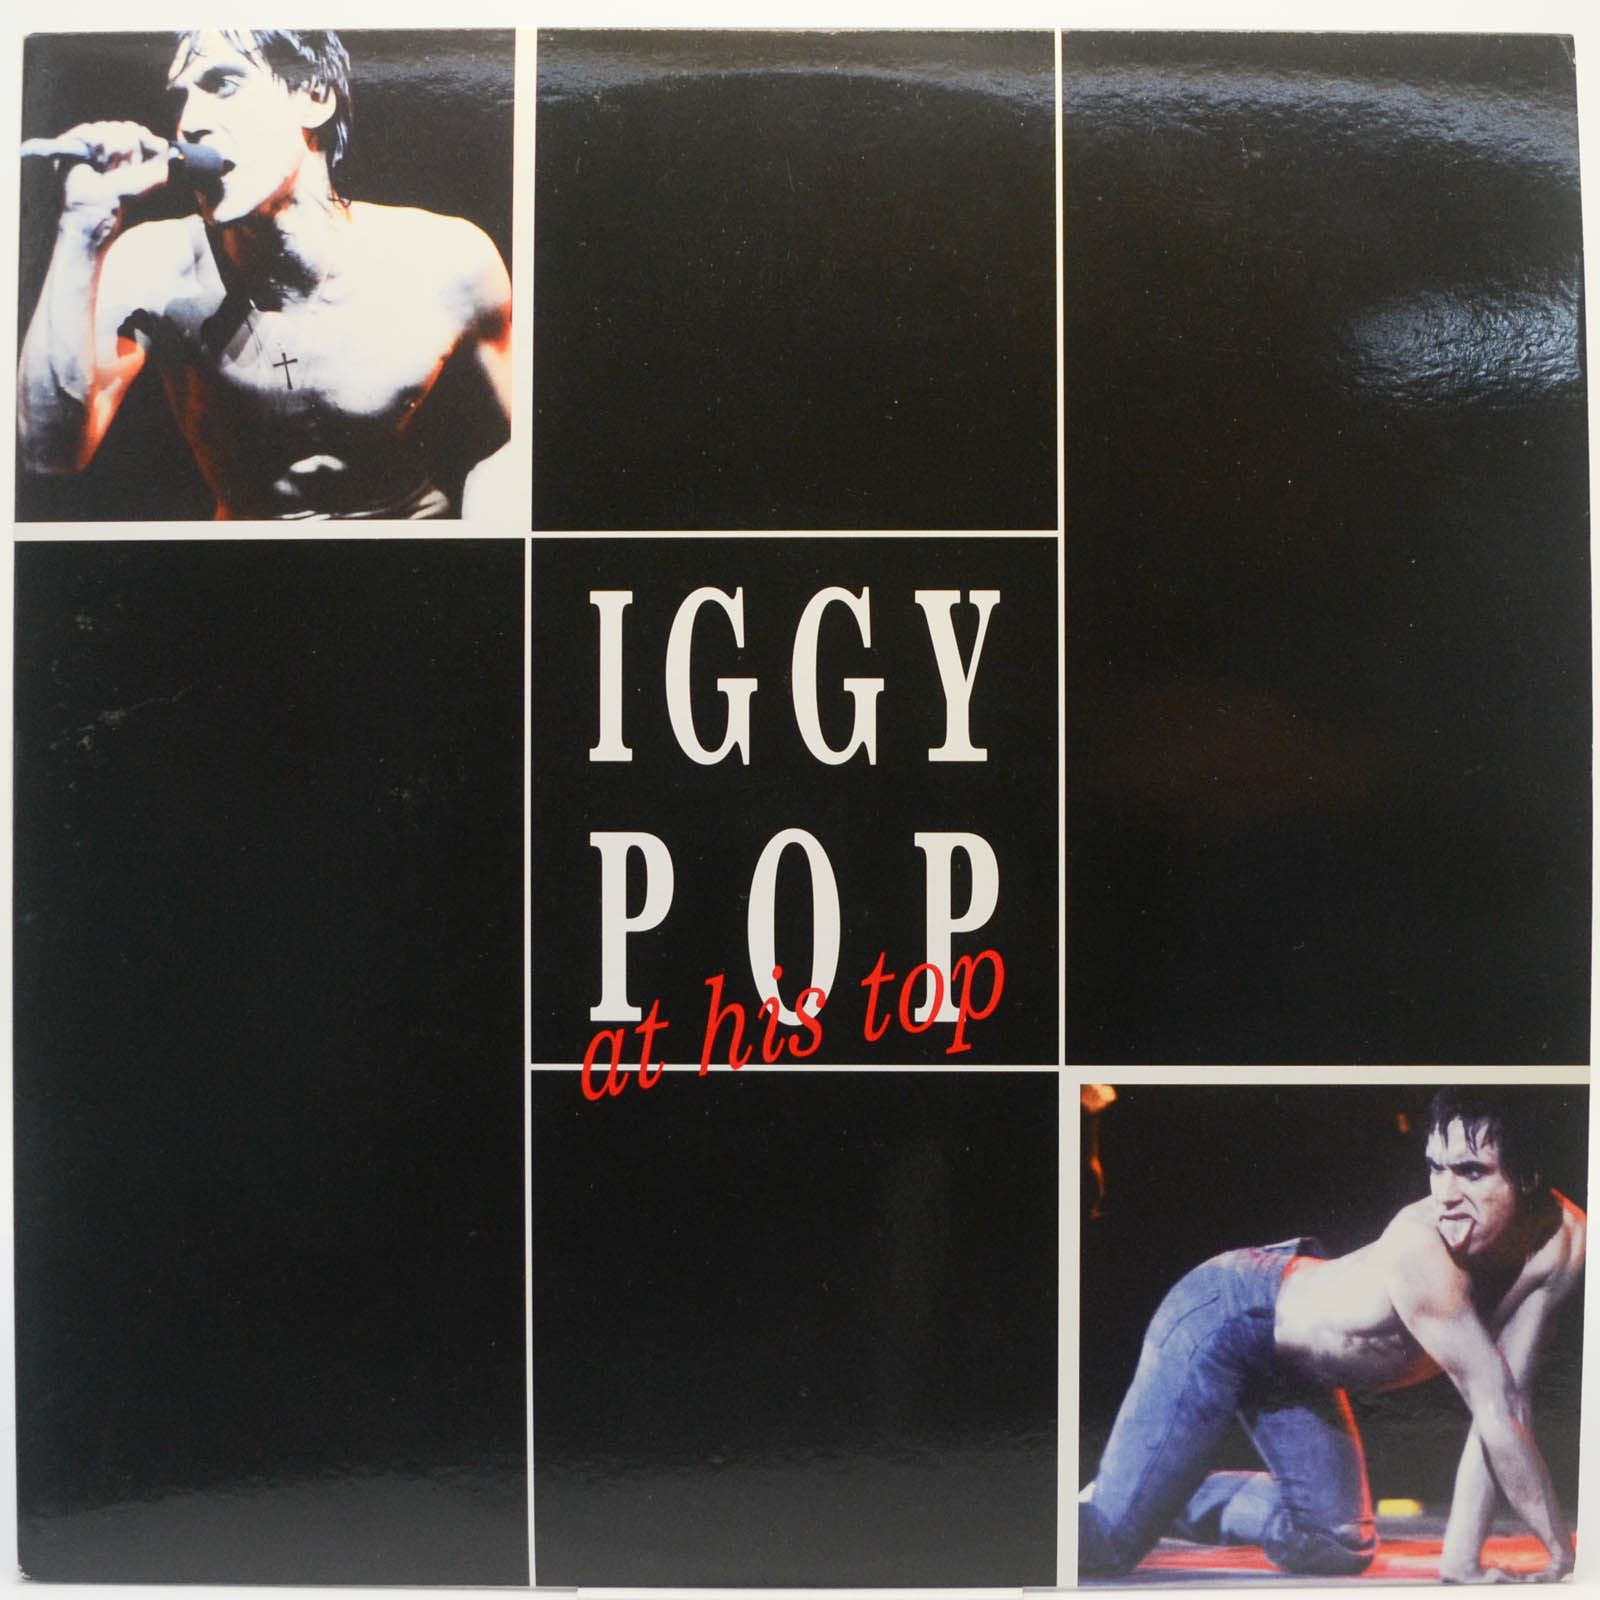 iggy pop — At This Top, 2007